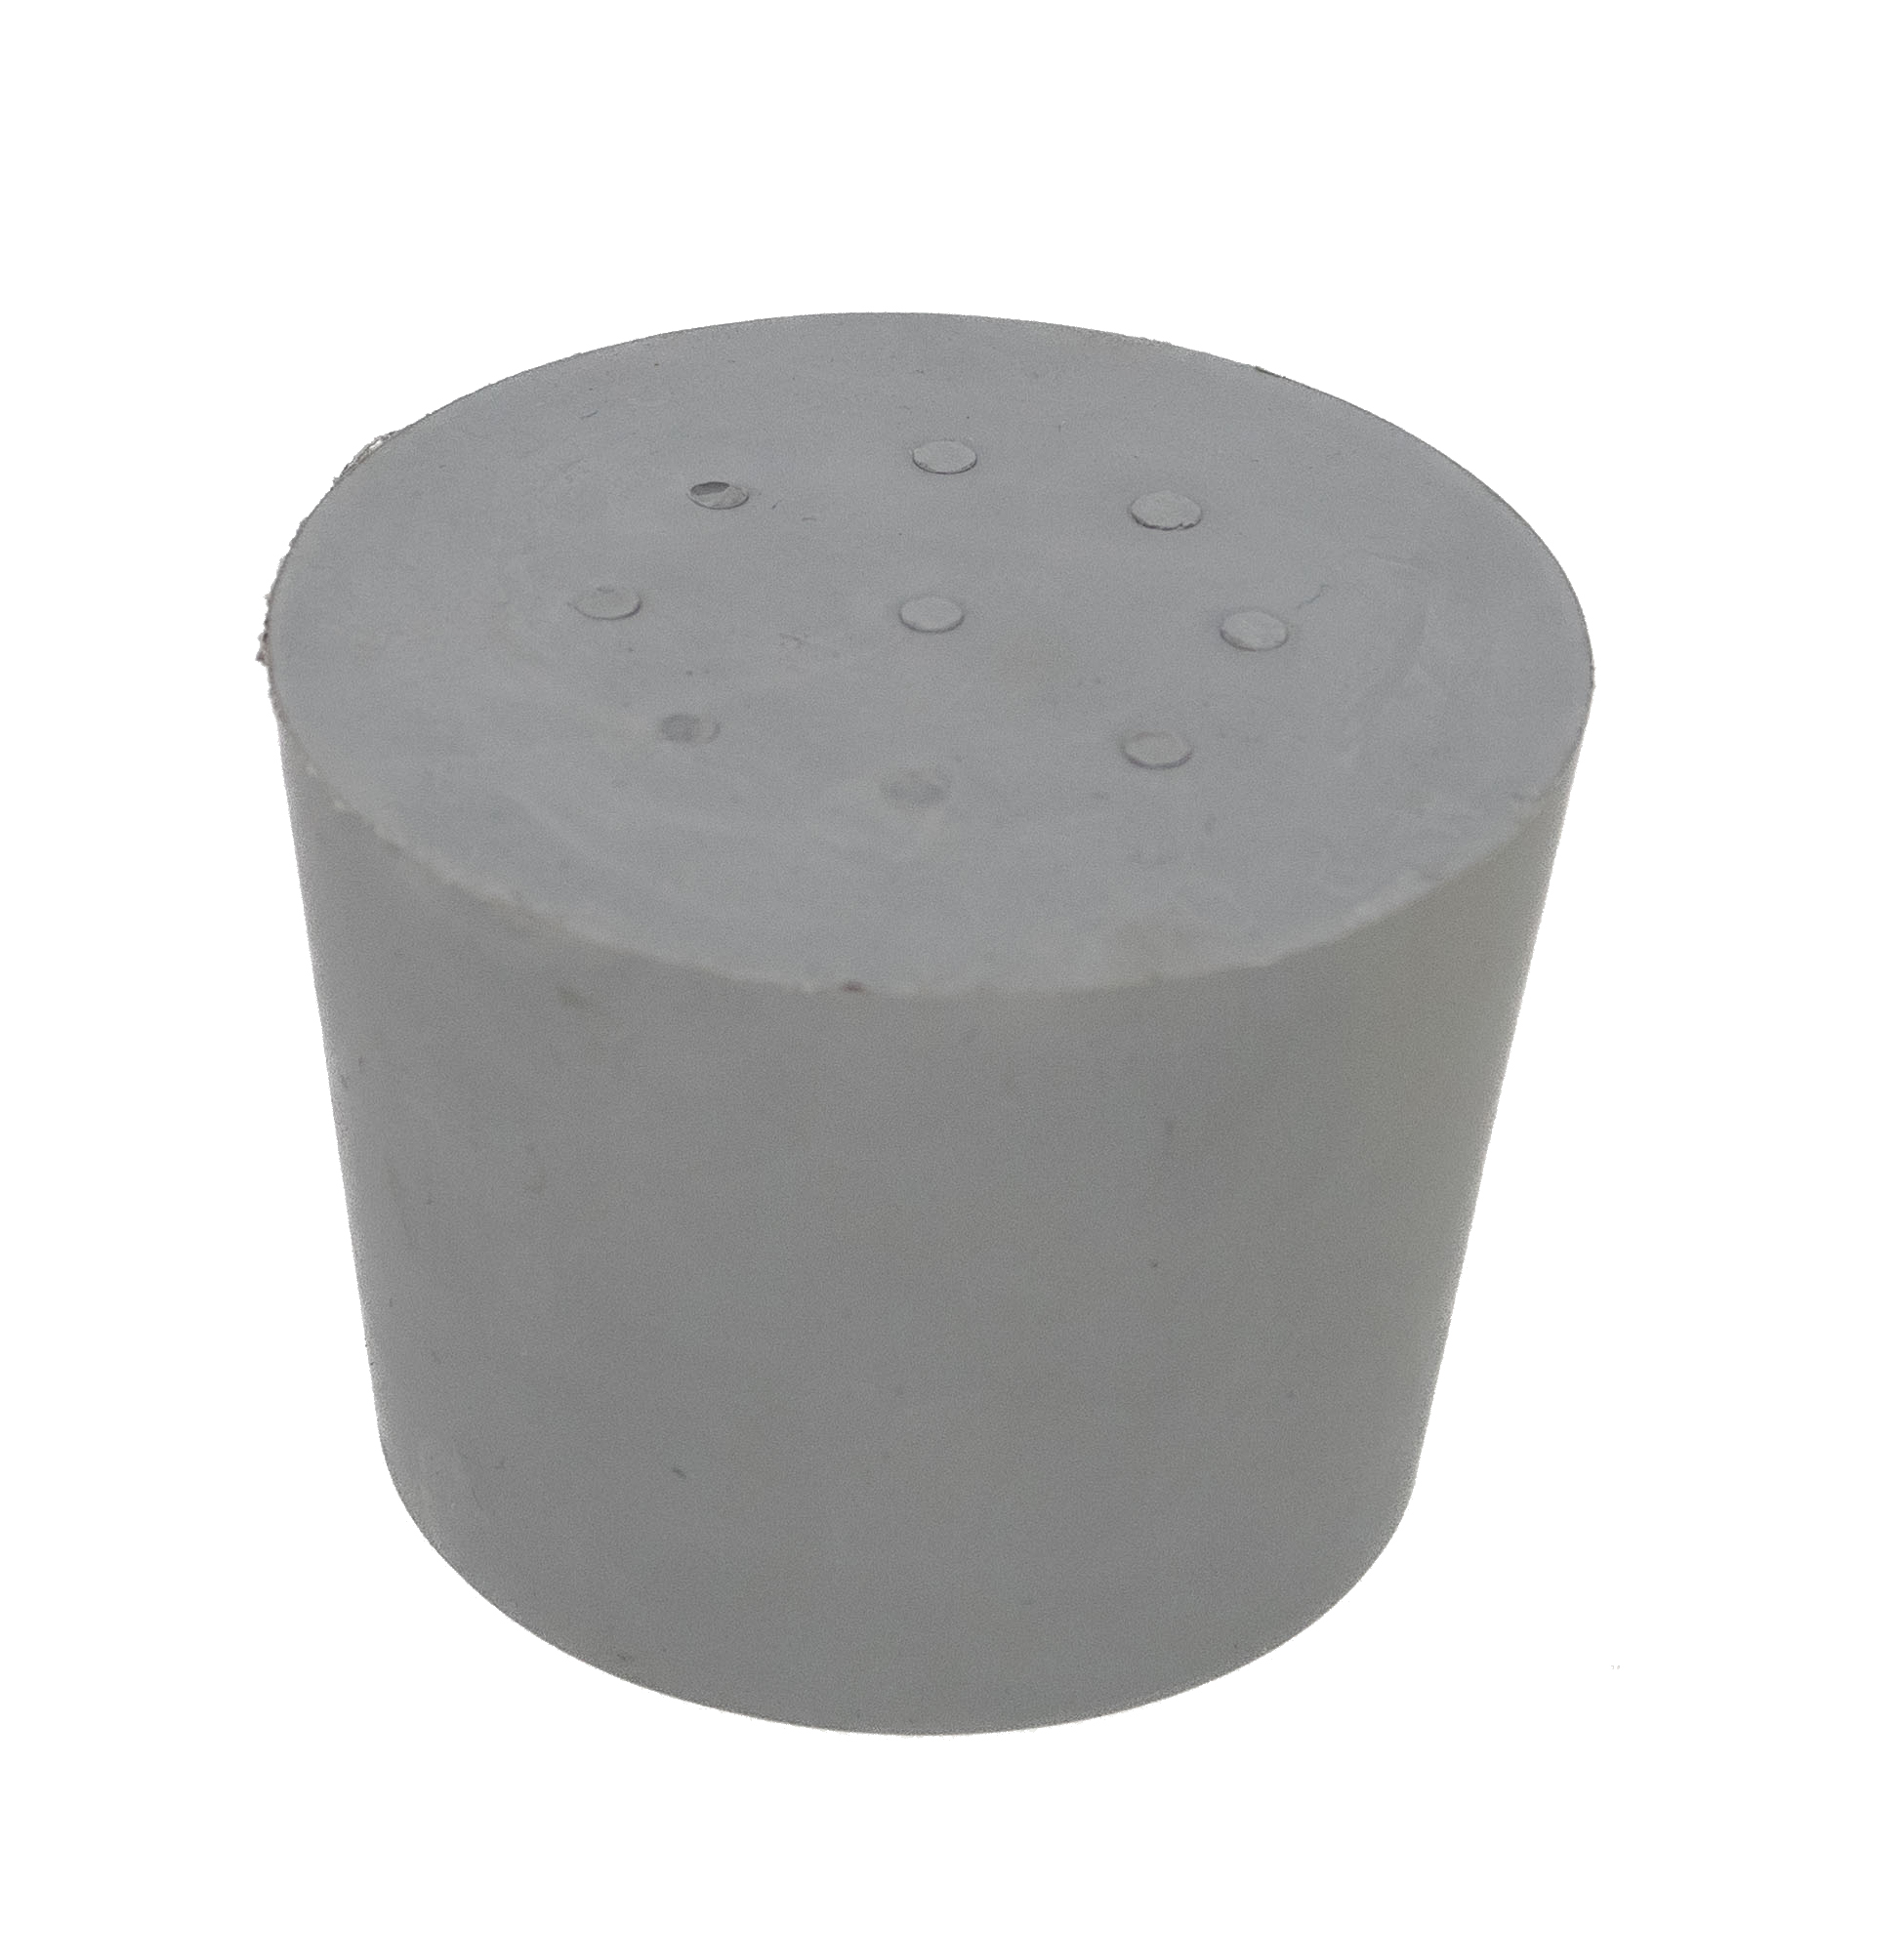 Rubber stopper grey 47 x 55 mm without hole